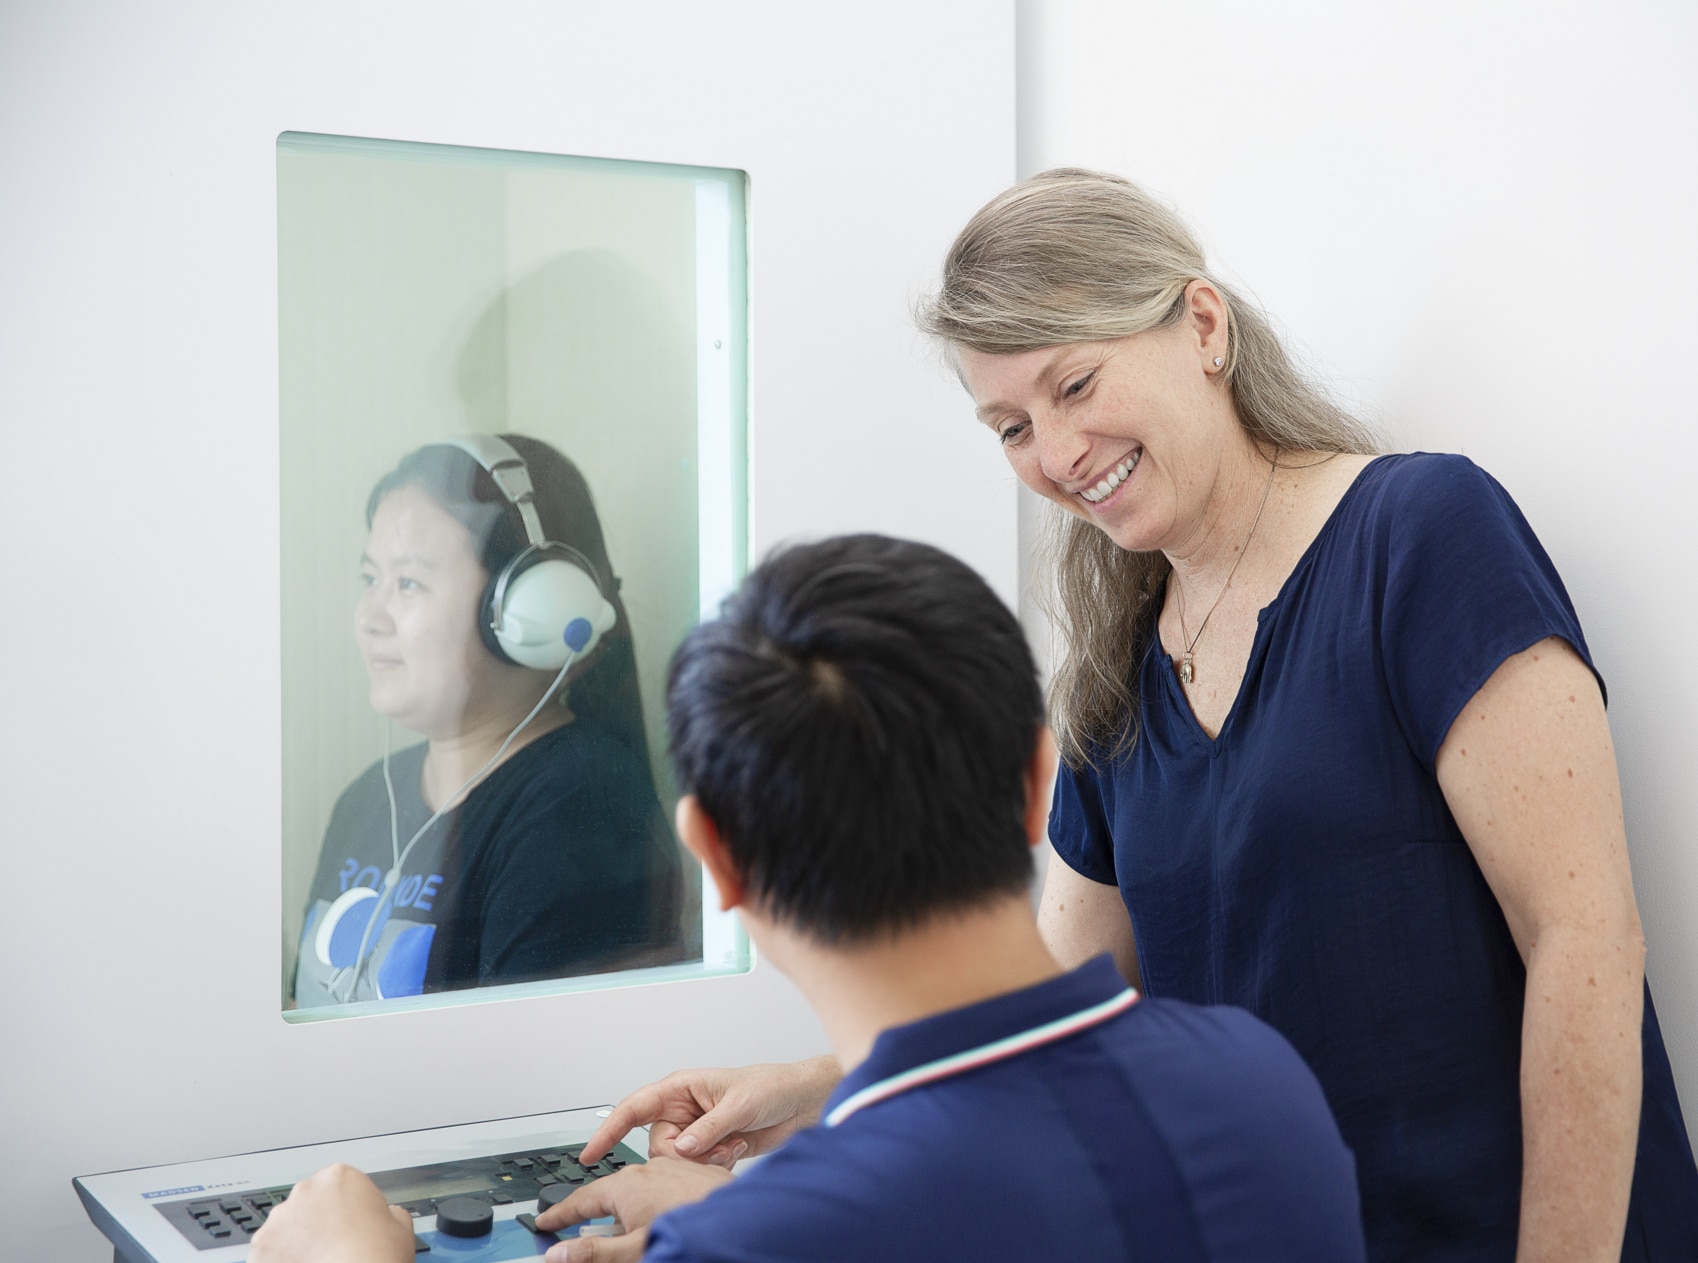 Audiologists testing sound on woman with headphones on through a window